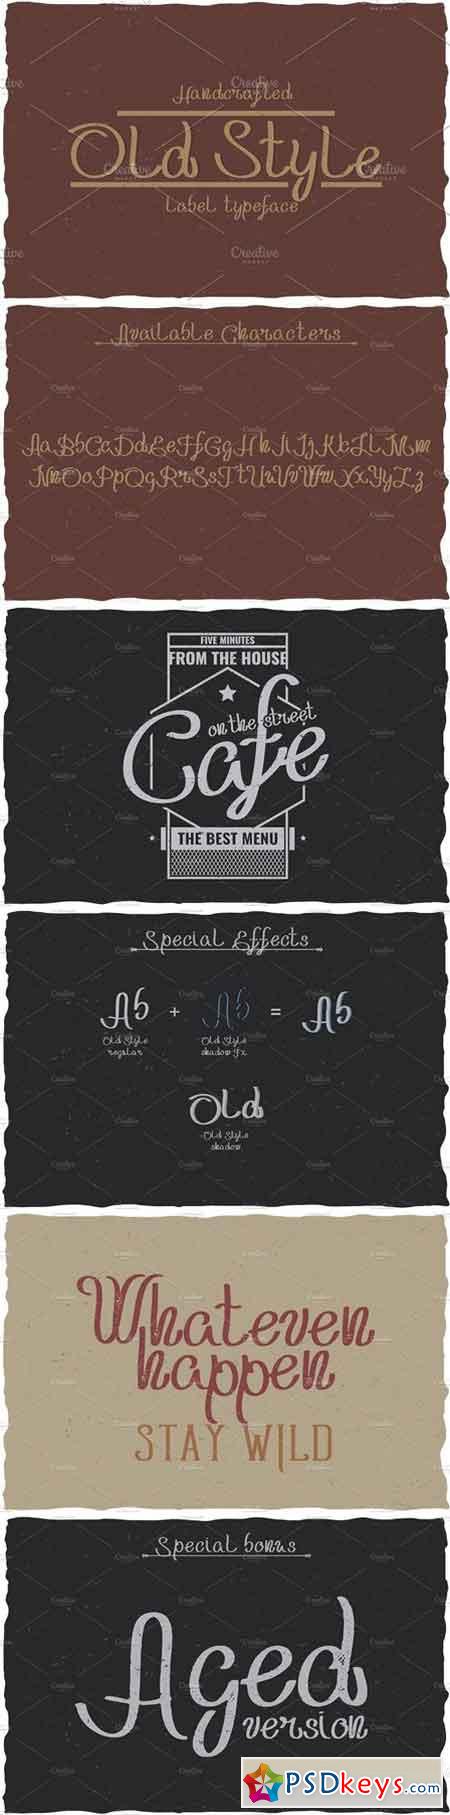 Handcrafted Old Style Label Typeface 1638320